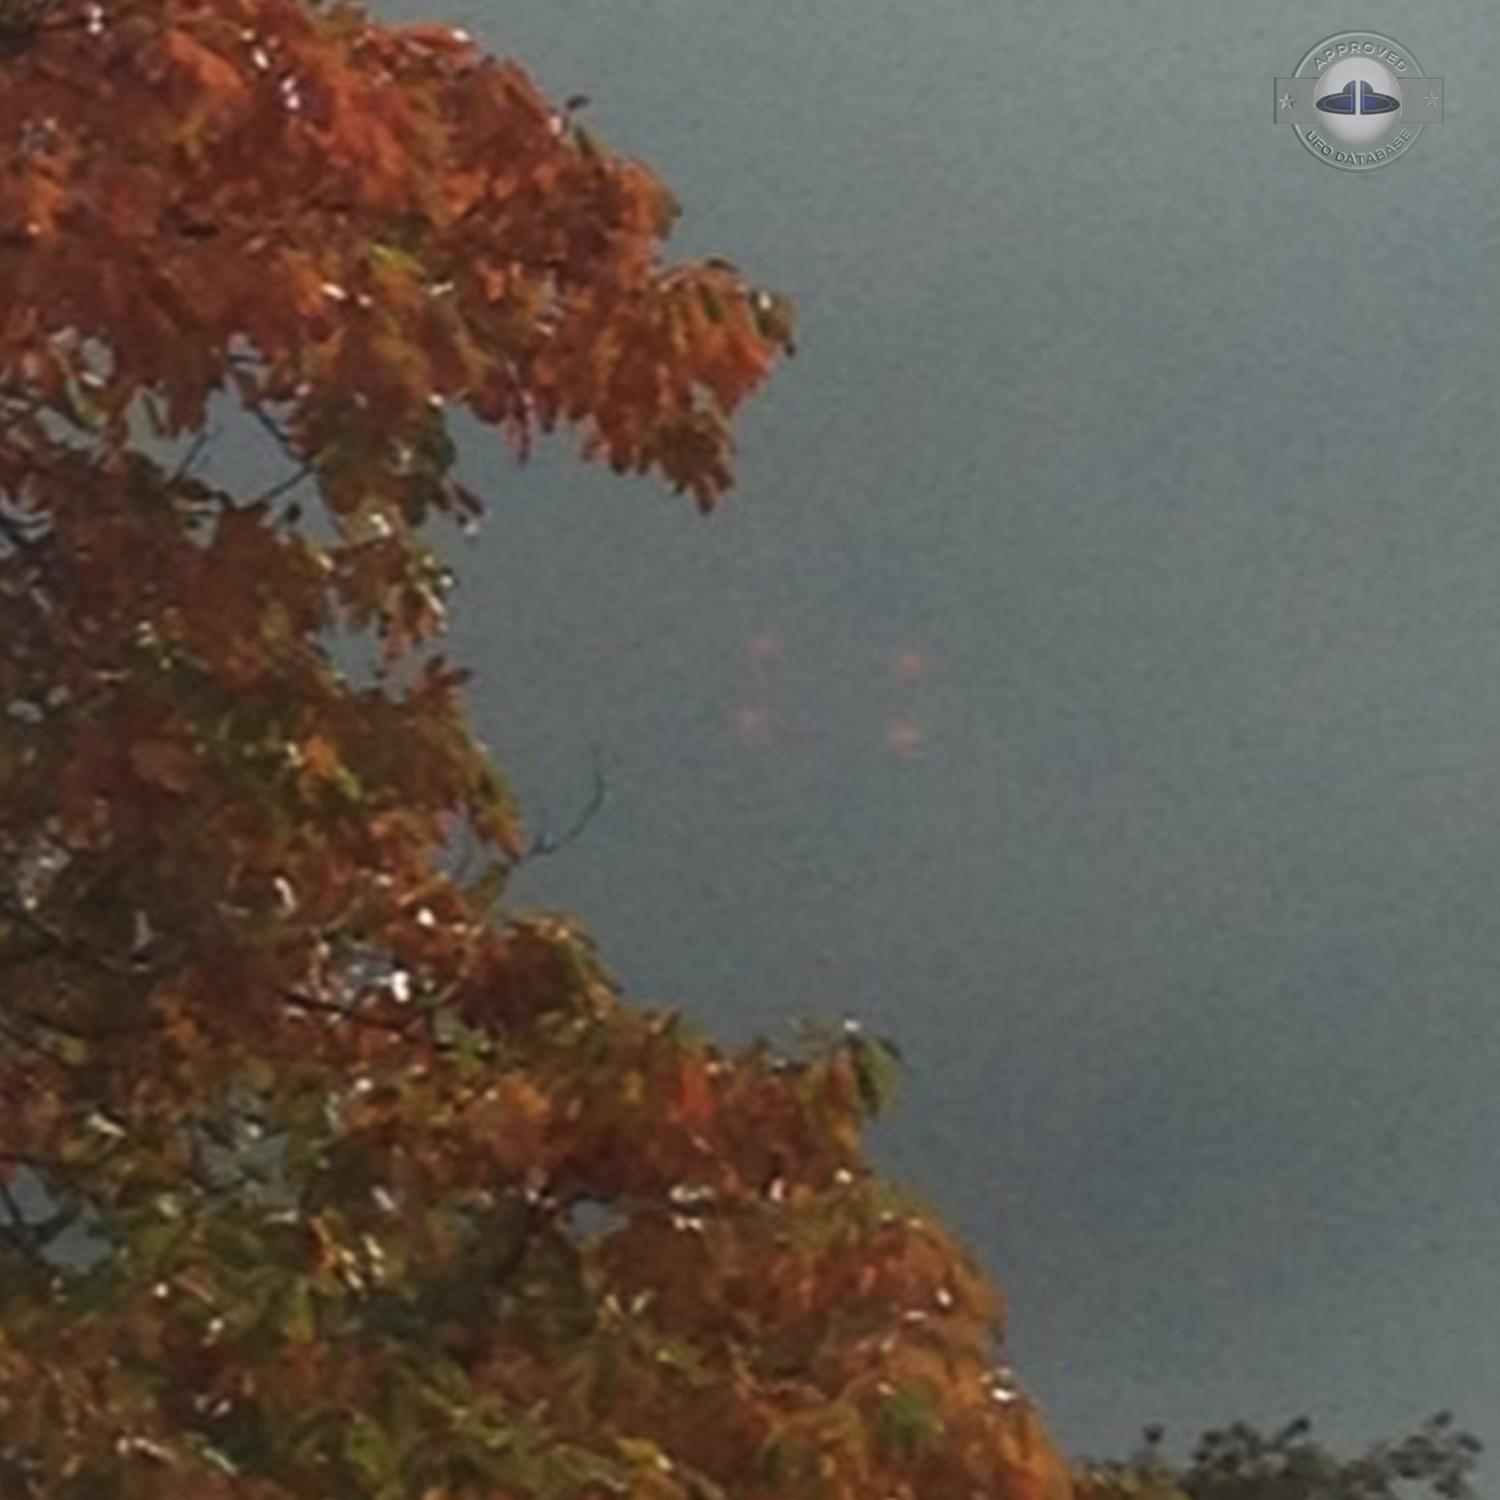 UFO made of 4 red dots in the grey sky of Bellmawr New Jersey USA 2012 UFO Picture #508-2